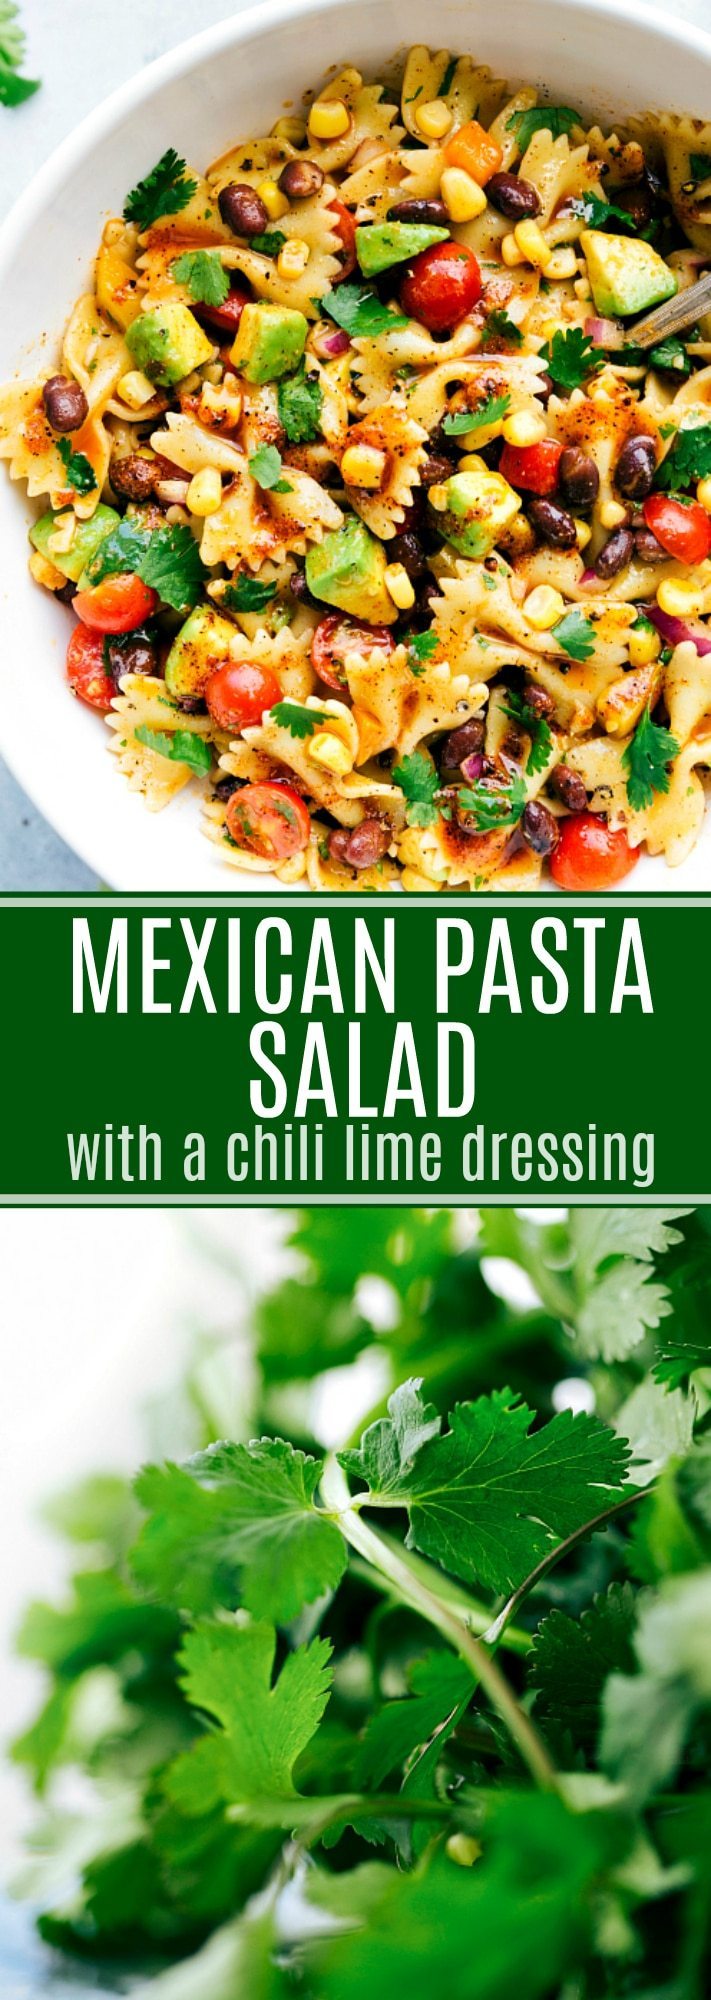 The ultimate BEST EVER MEXICAN PASTA SALAD with an easy delicious chili-lime vinaigrette. via chelseasmessyapron.com